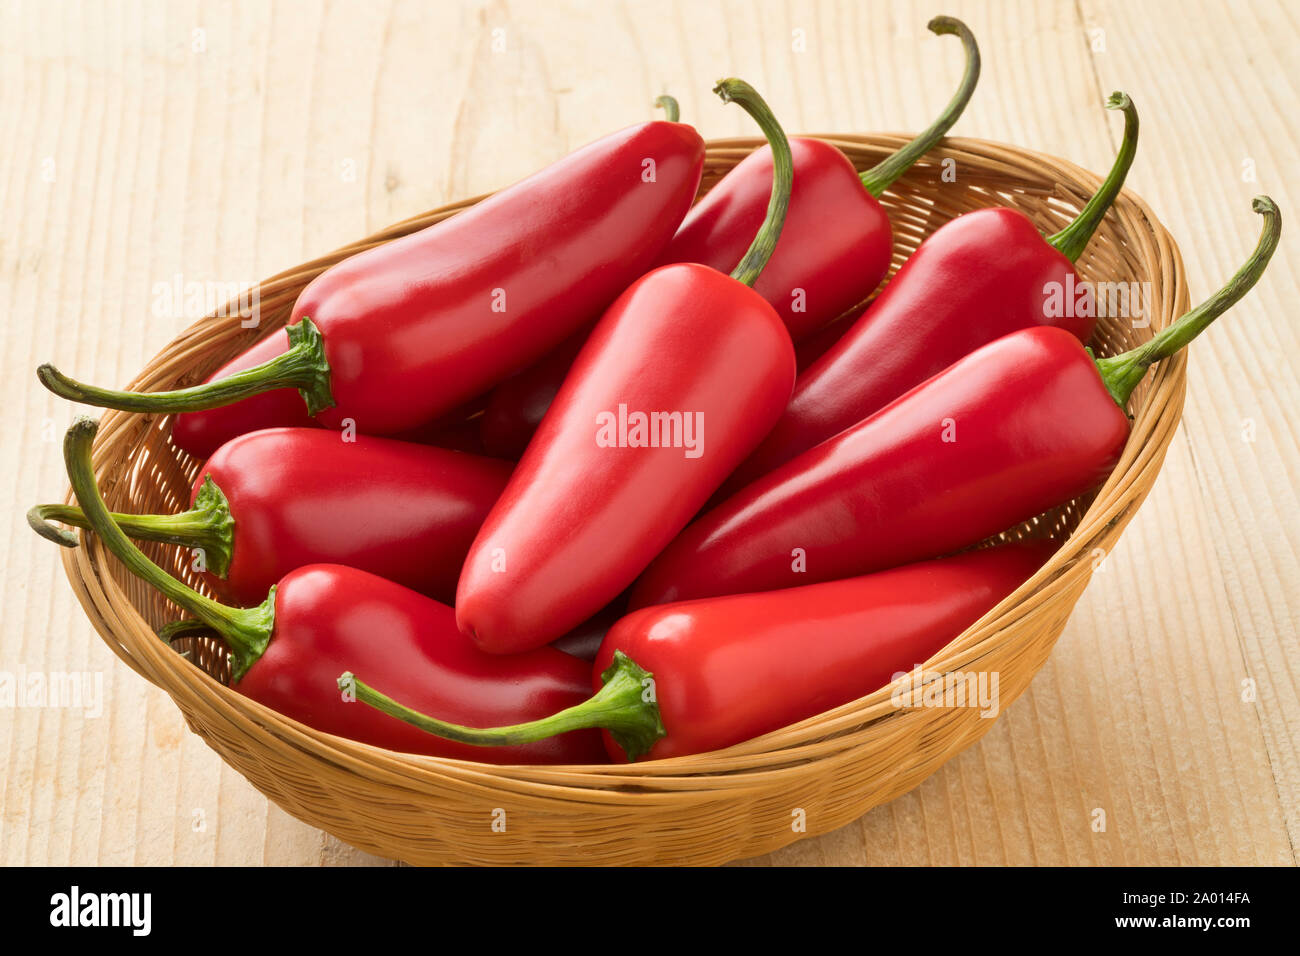 Basket with fresh red Jalapeno peppers Stock Photo